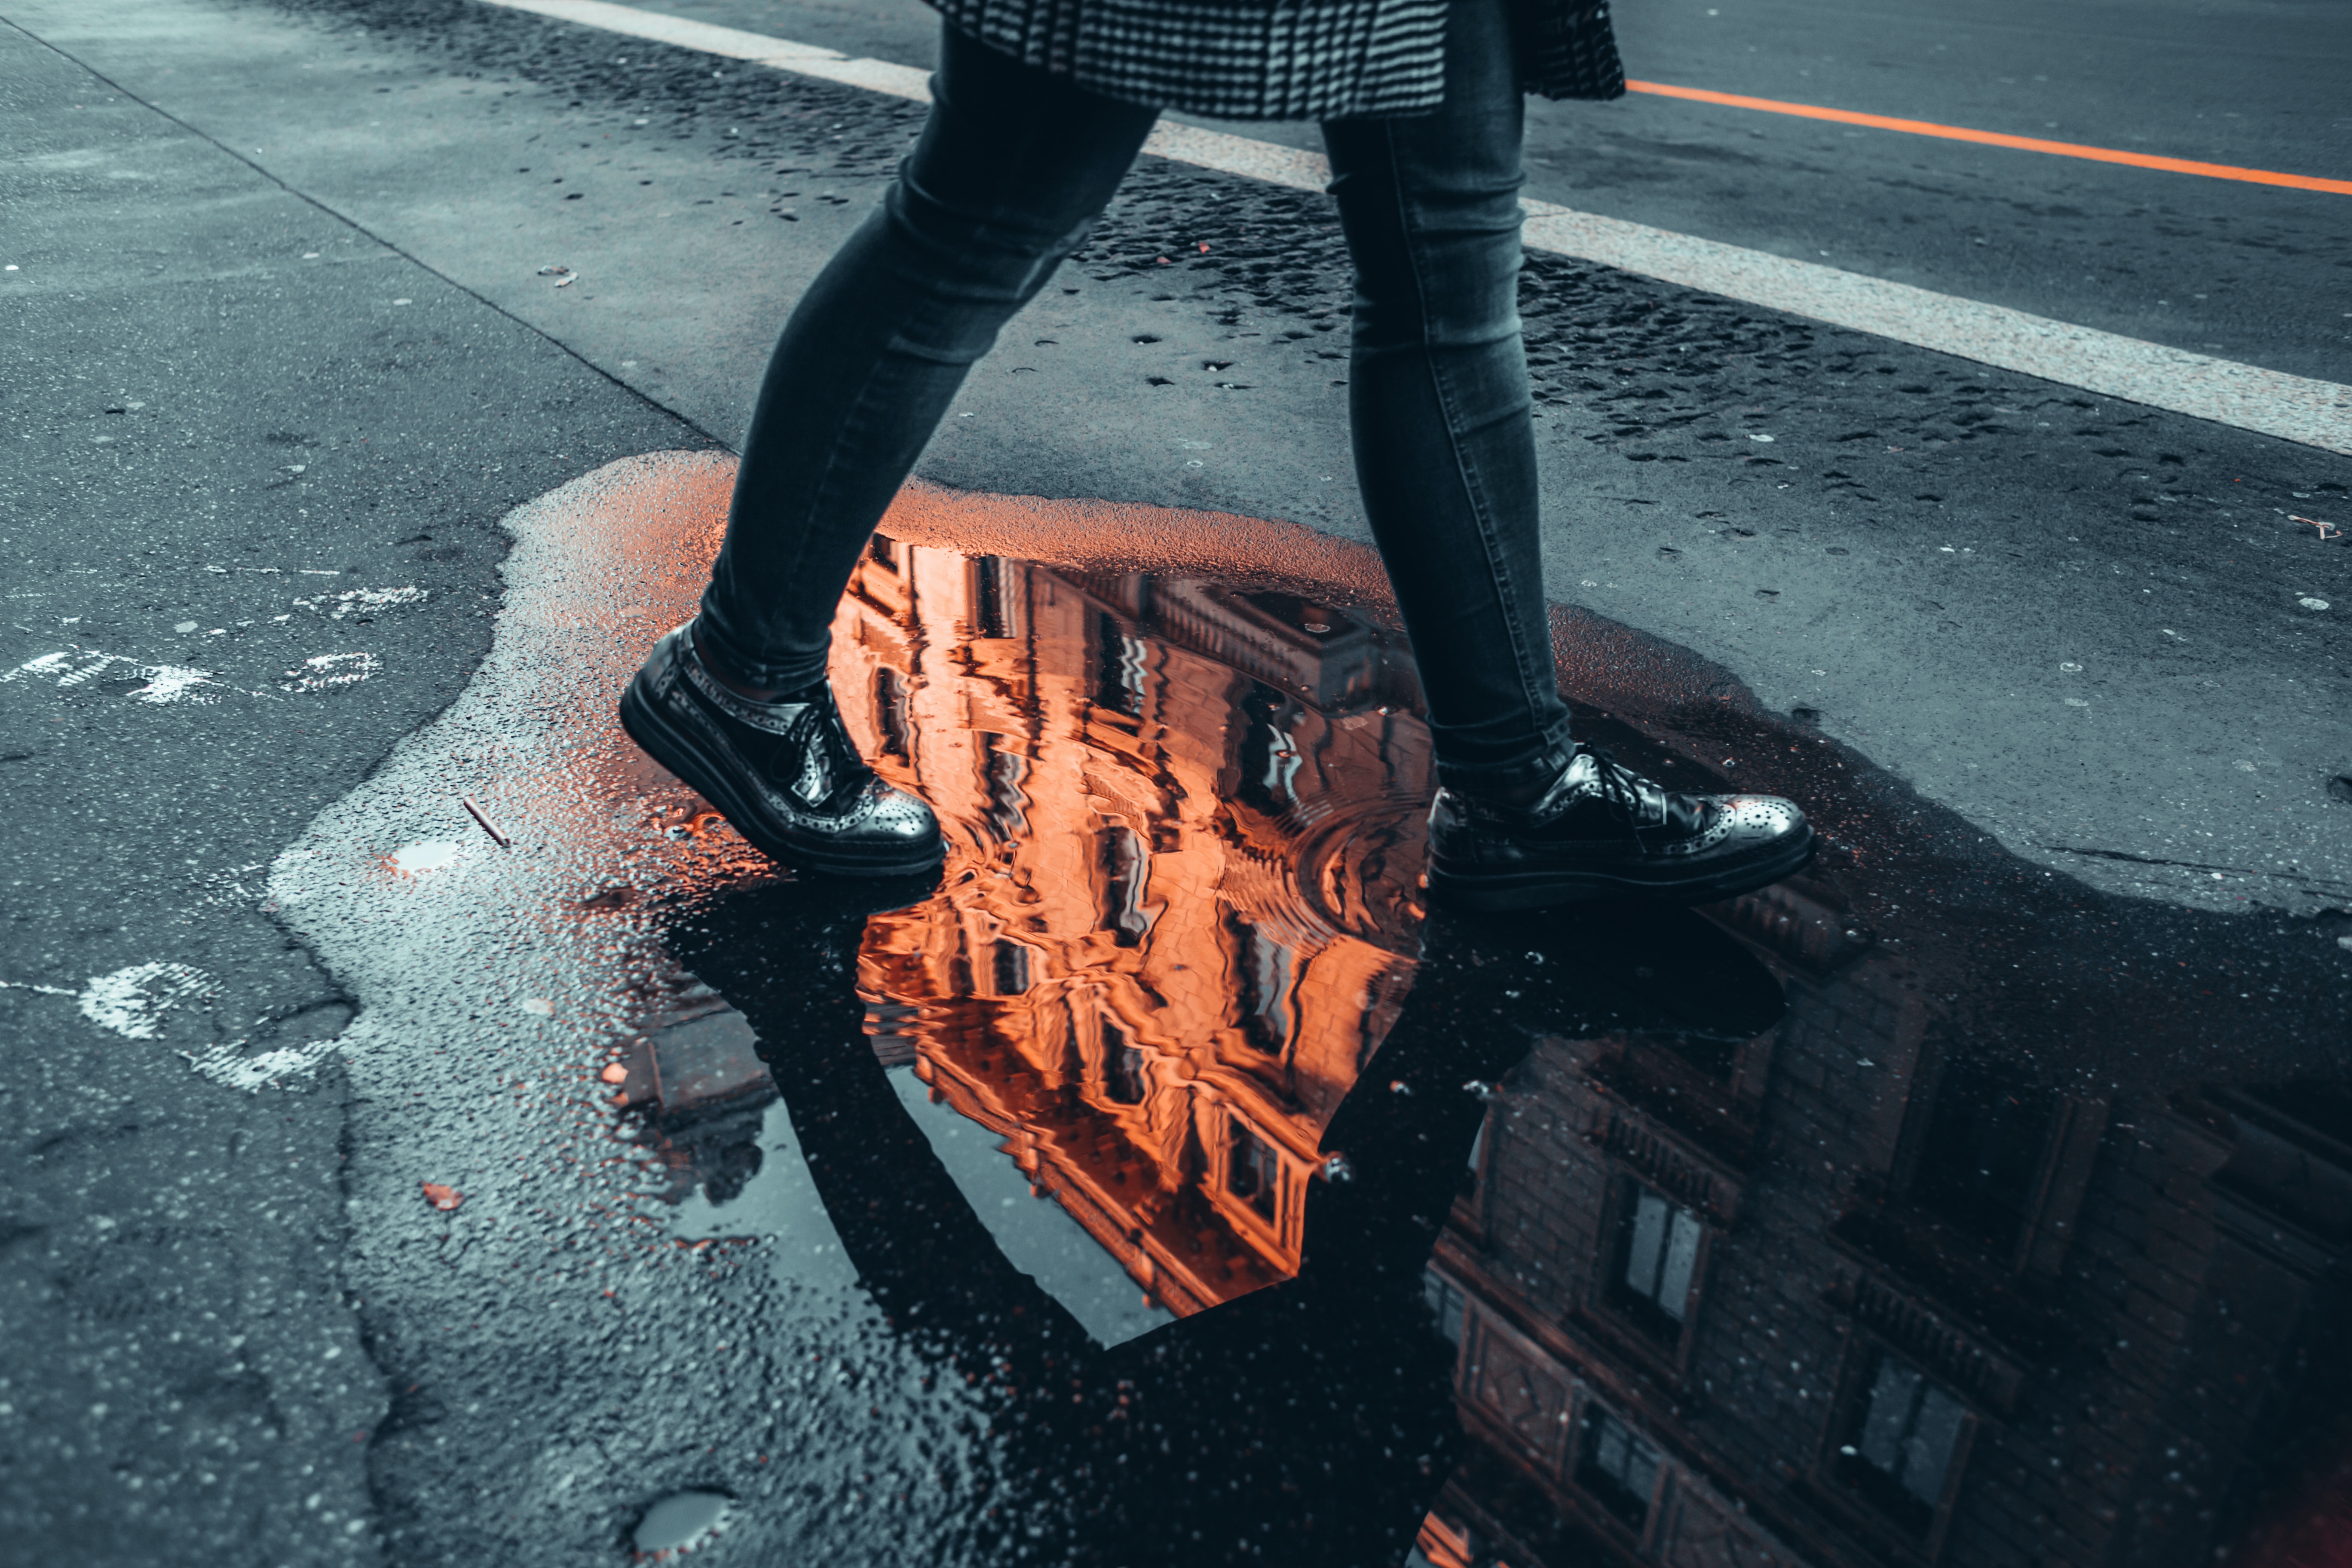 A person walking through a puddle on a city street